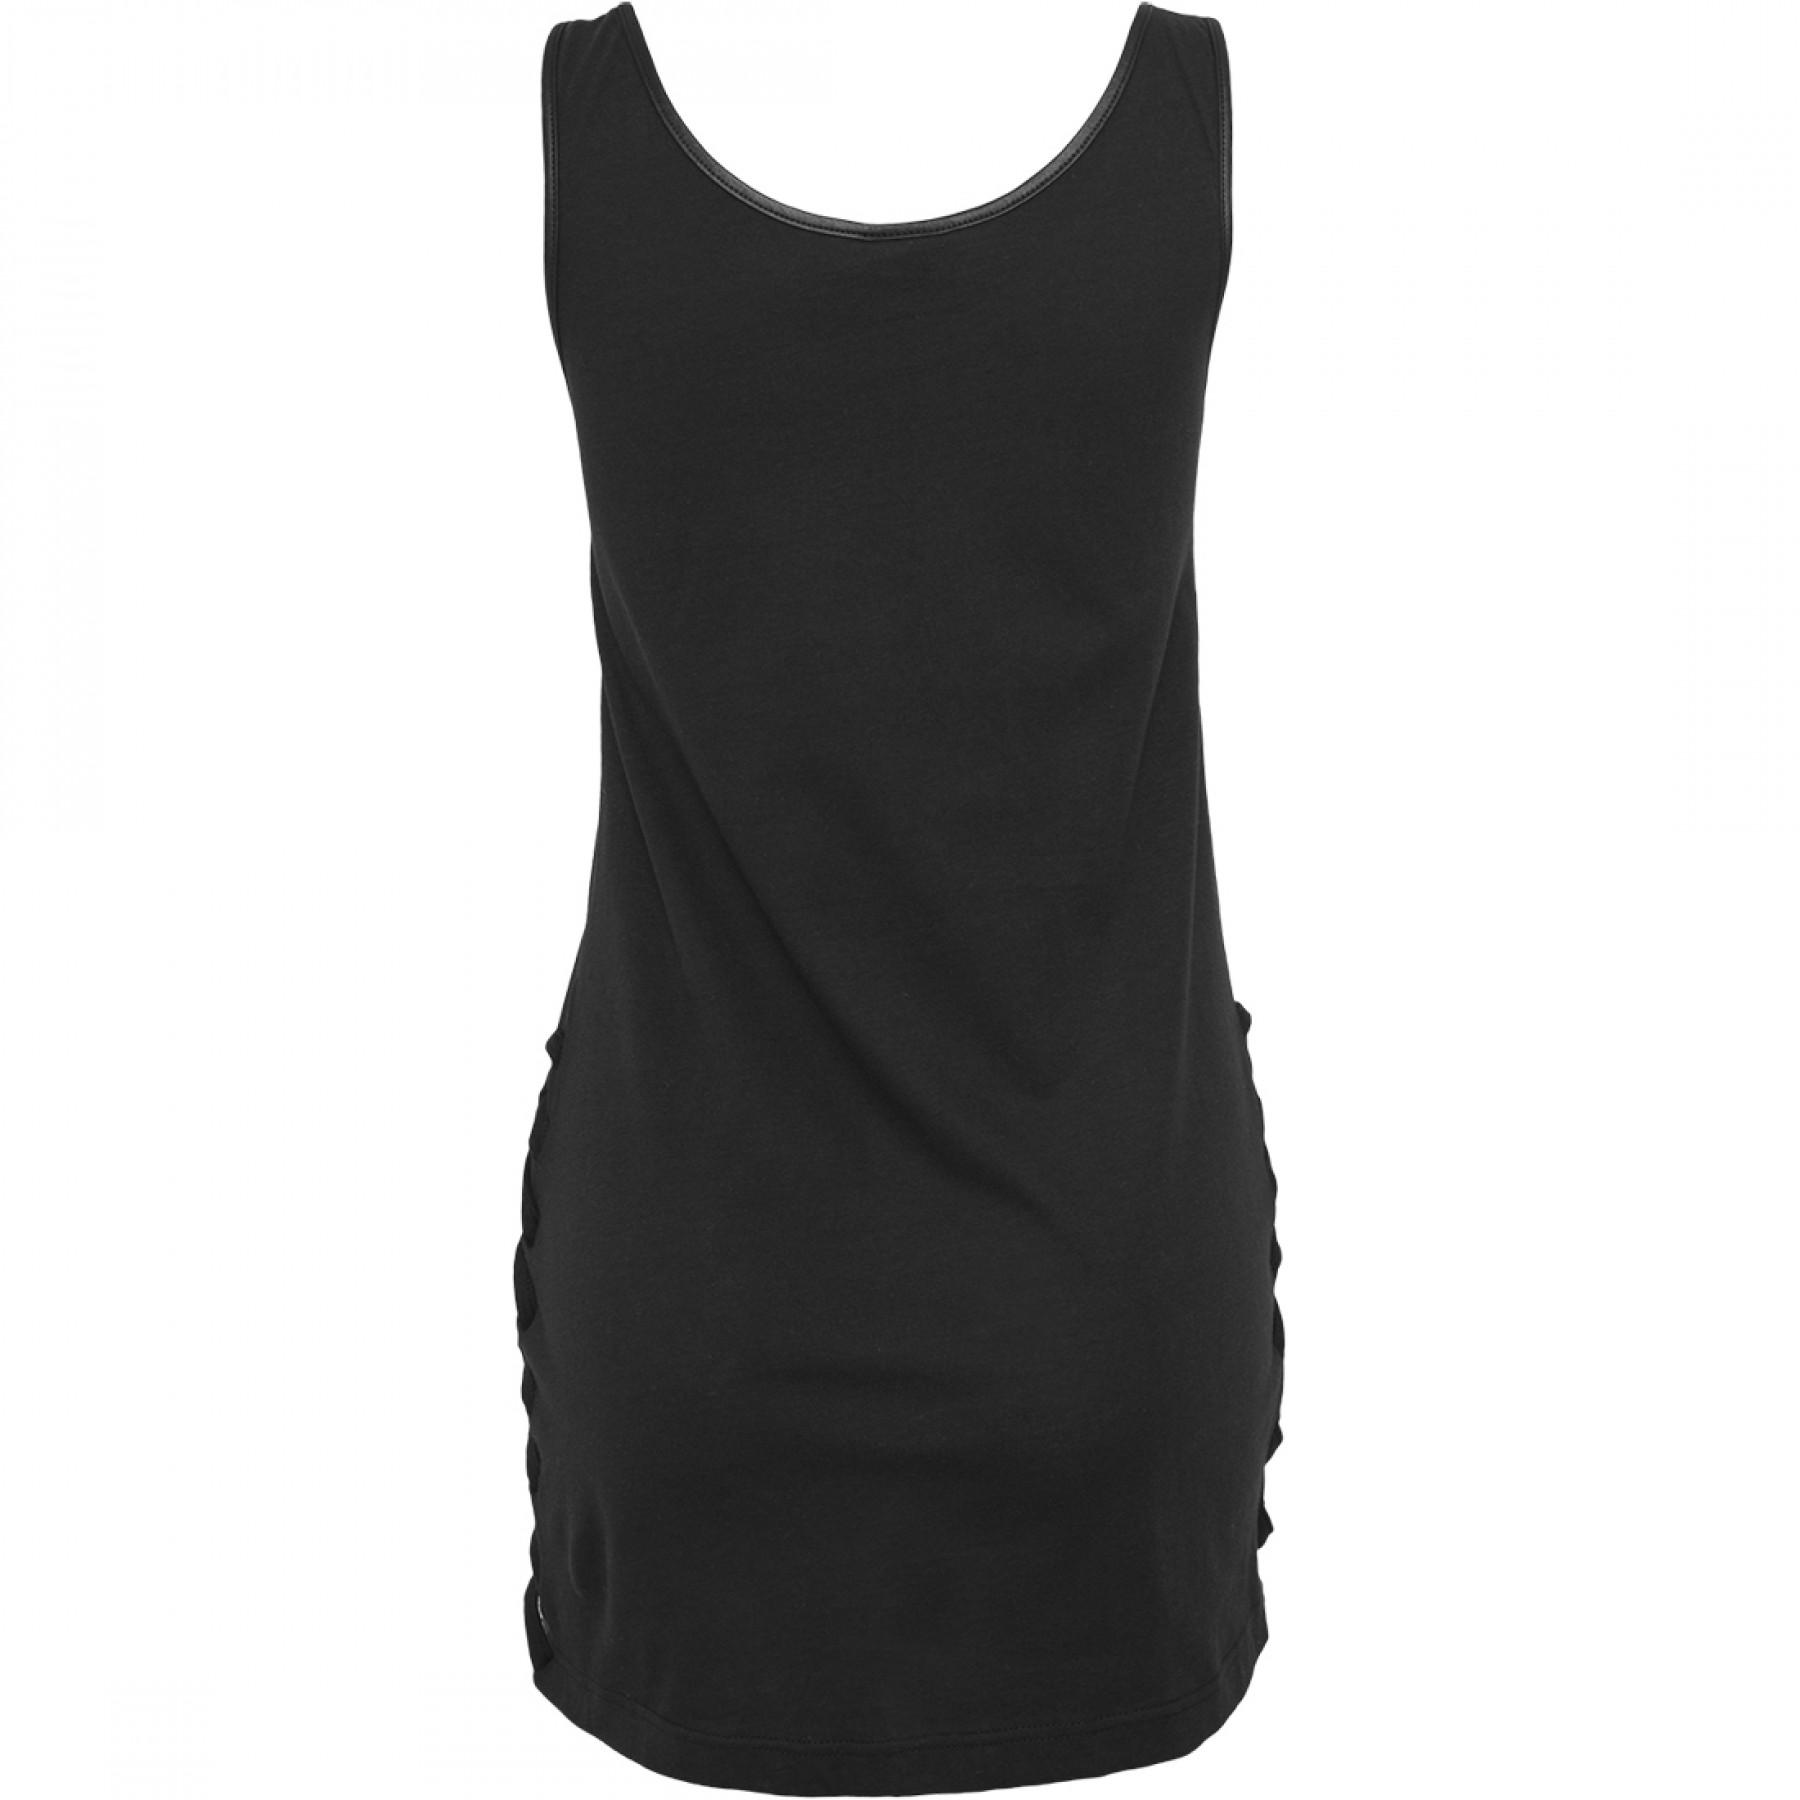 Women's Urban Classic leather imitation knotted tank top